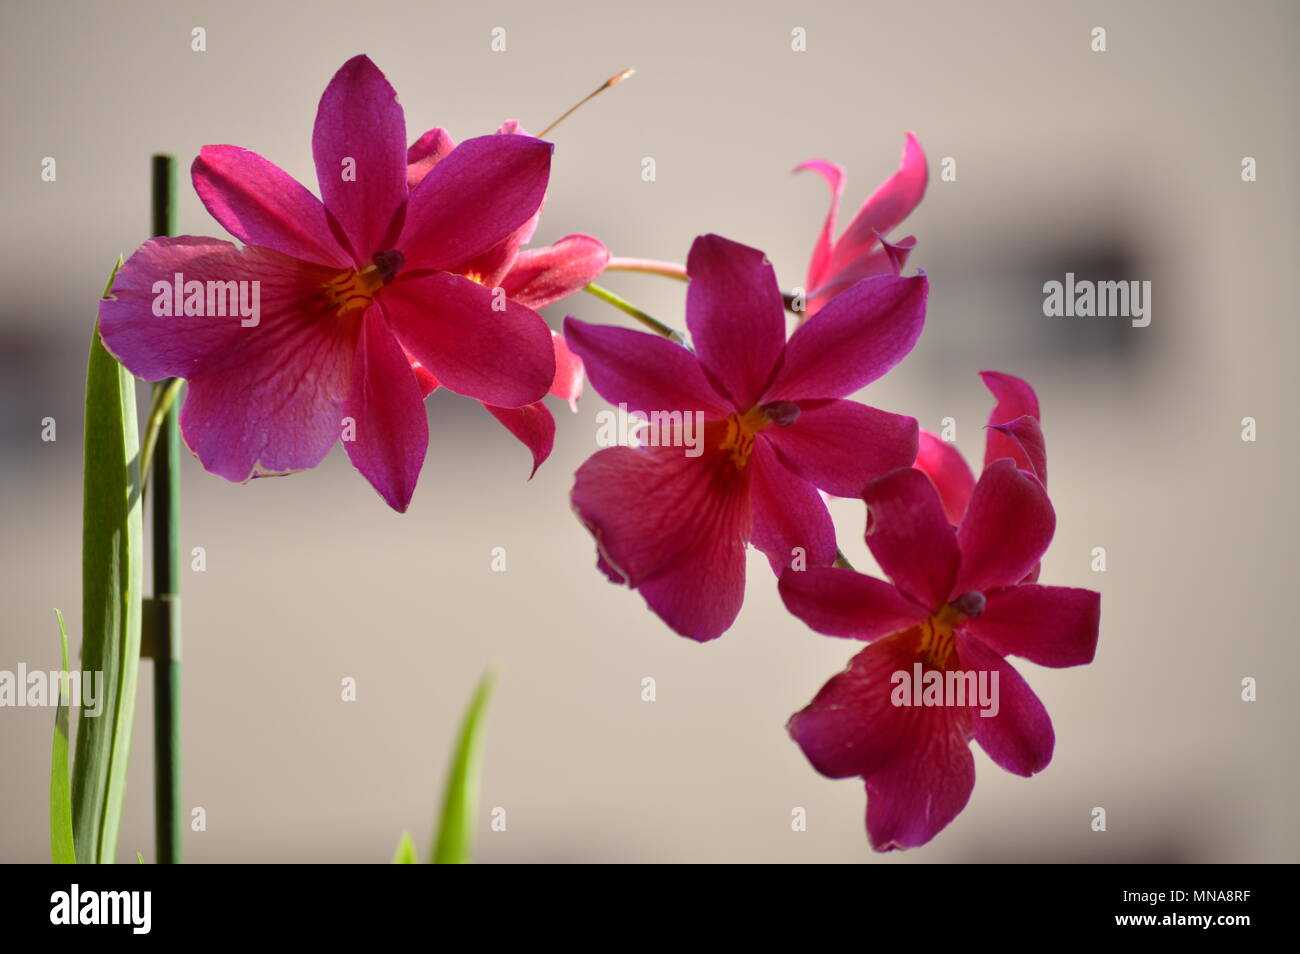 Orchid Dendrobium Berry Oda Pink Red Photograph Of A Stick Replete With Various Flowers. Nature Orchid Botanical Biology Phytology Flowers Plants. May Stock Photo